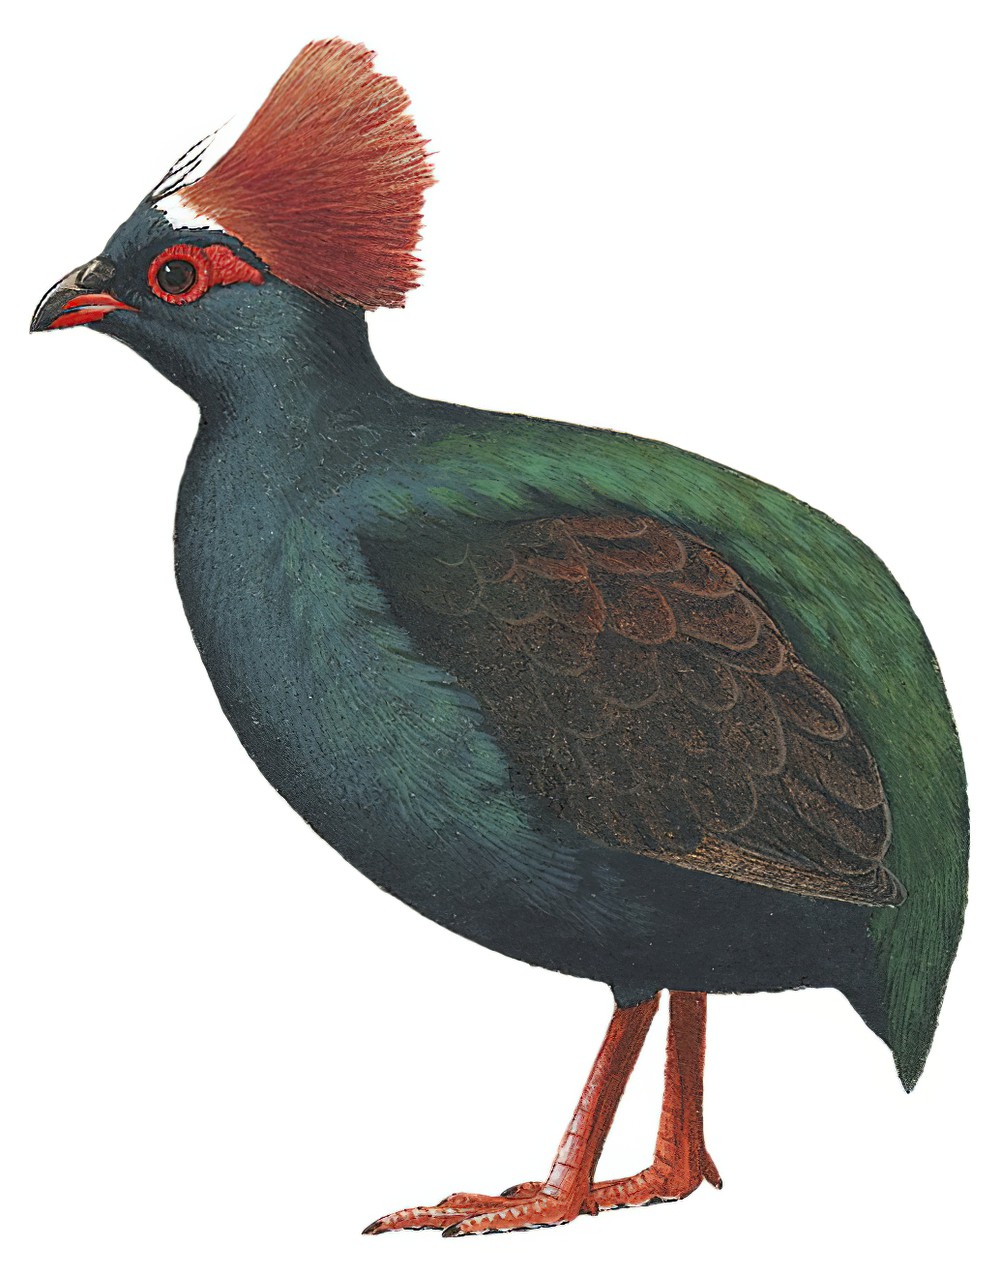 Crested Partridge / Rollulus rouloul